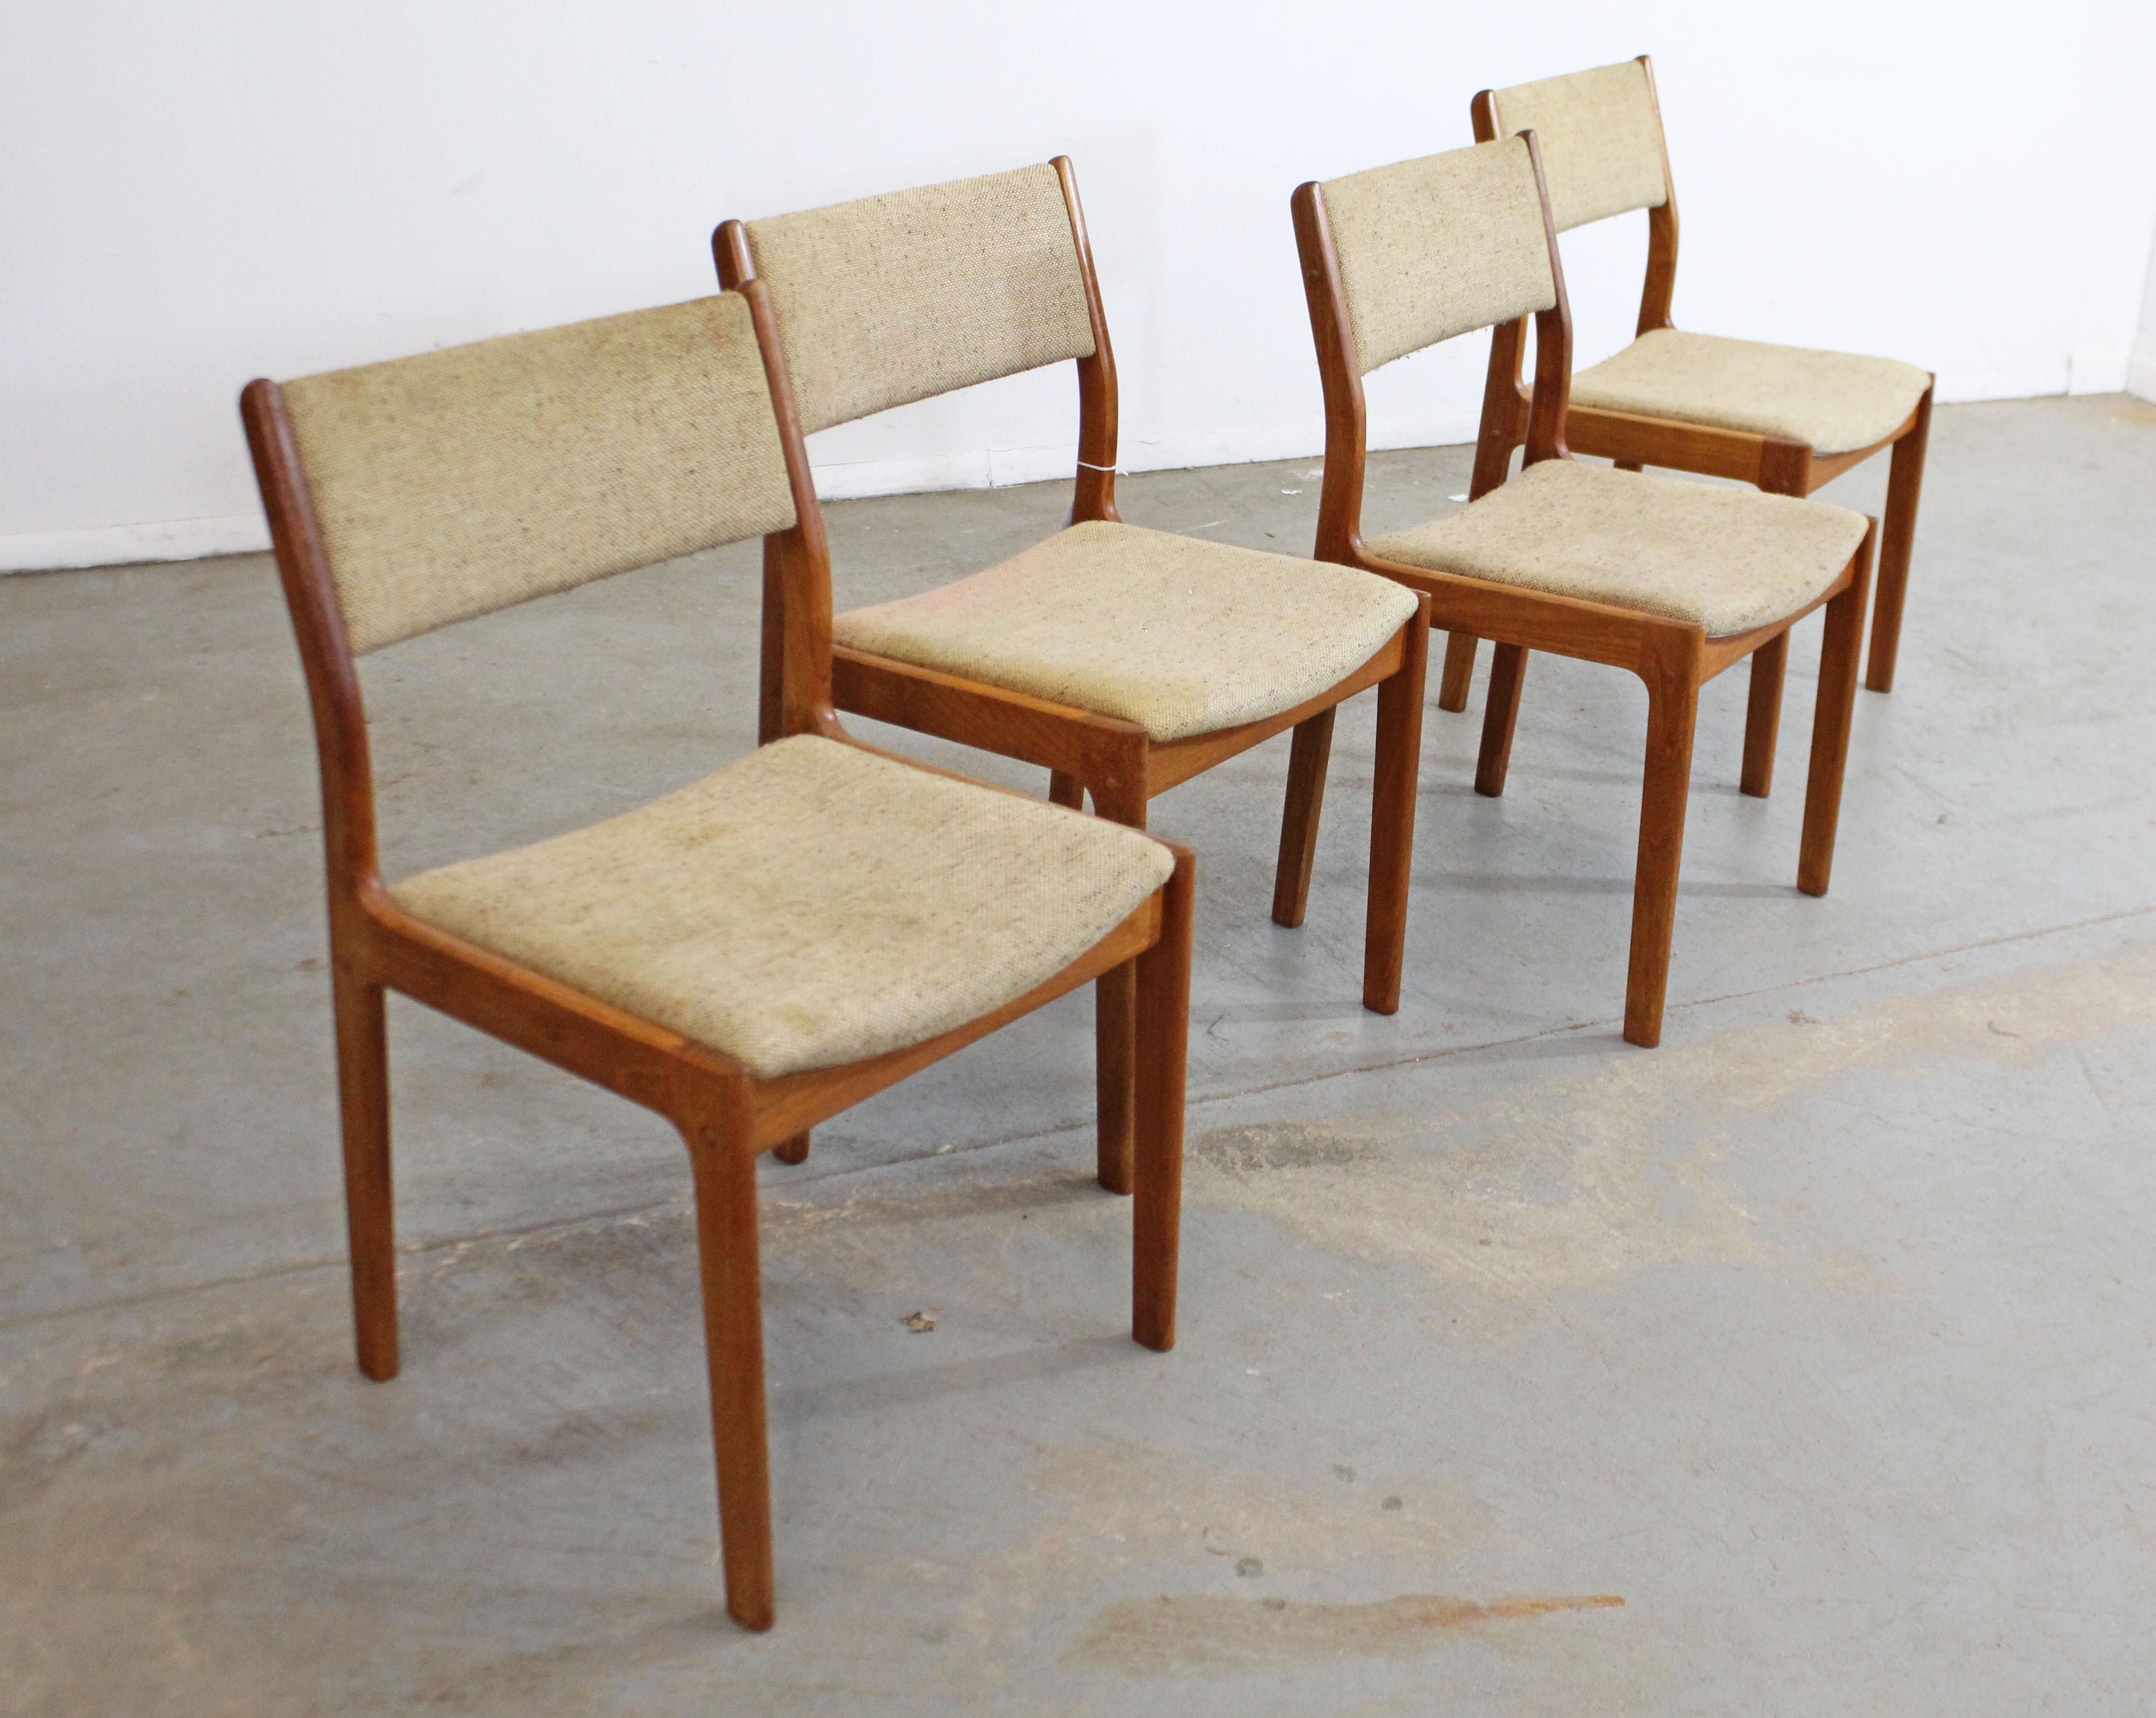 What a find. Offered is a vintage set of 4 teak side/dining chairs. This set has simple, but modern lines and could make an excellent addition to any home. They are in decent vintage condition, but can stand to be reupholstered. Has surface